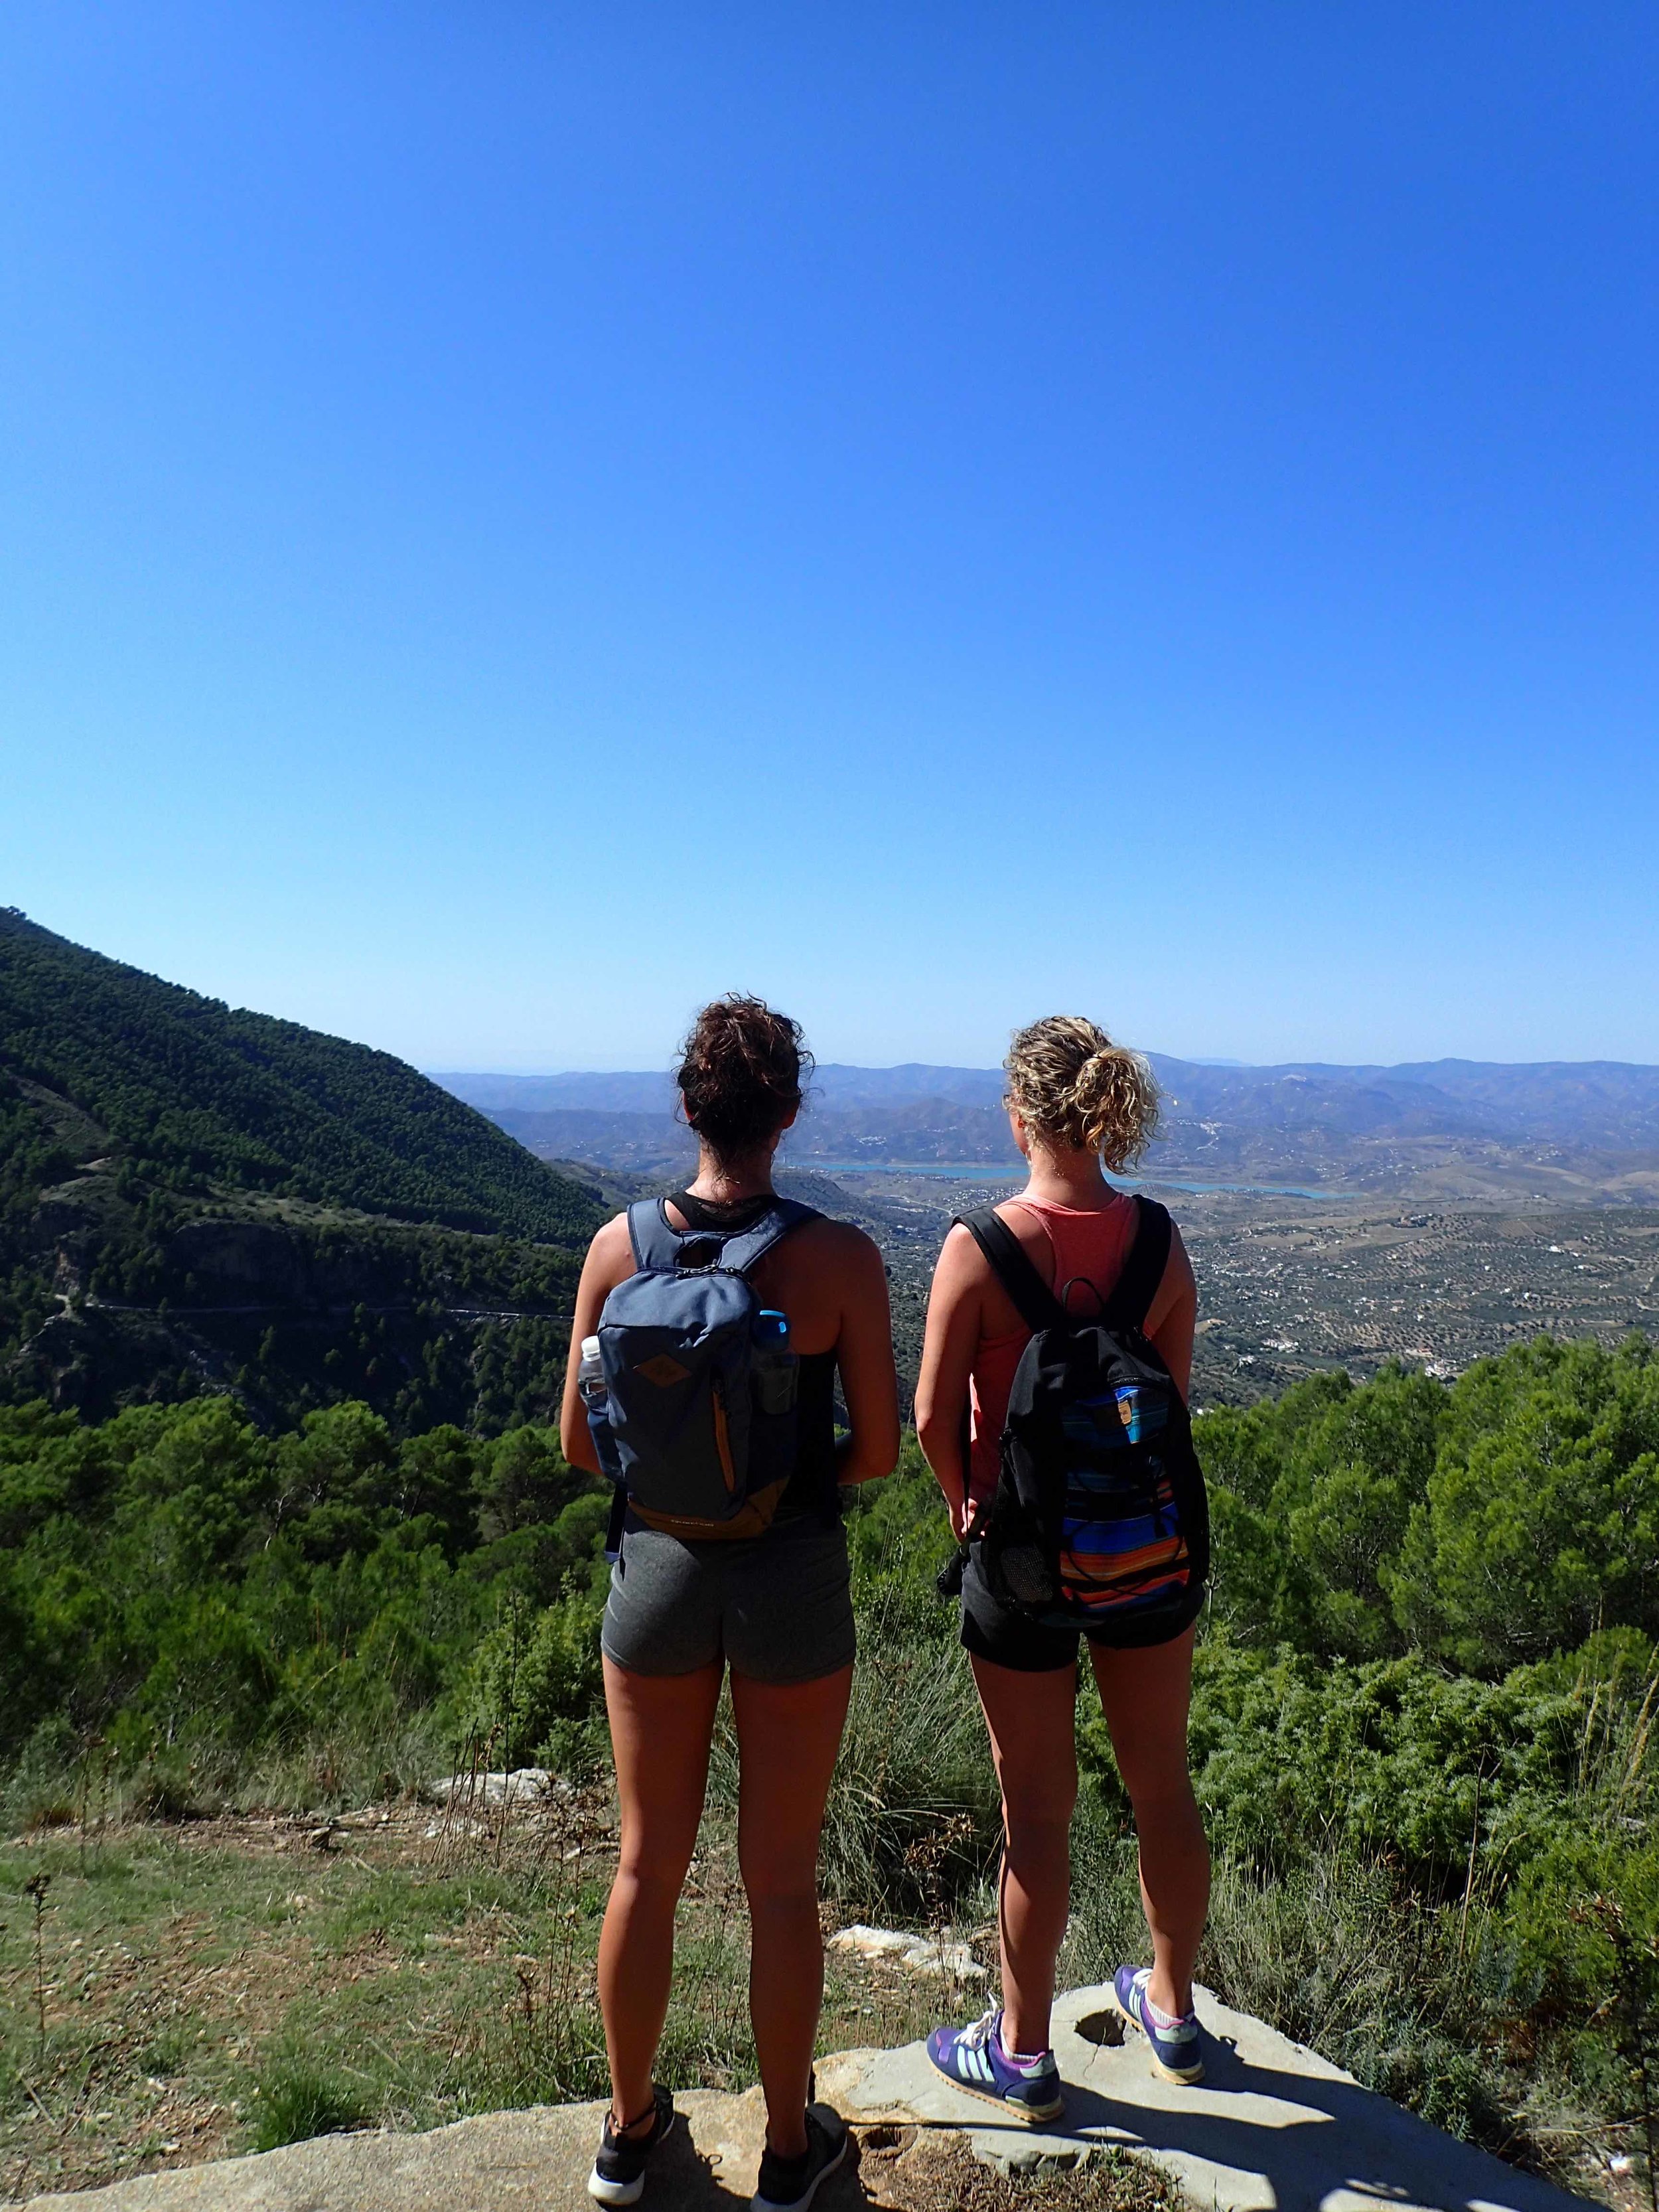 Sharing the amazing view at Yin Yang Yoga retreat in the Malaga mountains in Spain with Jane Bakx Yoga (Copy)